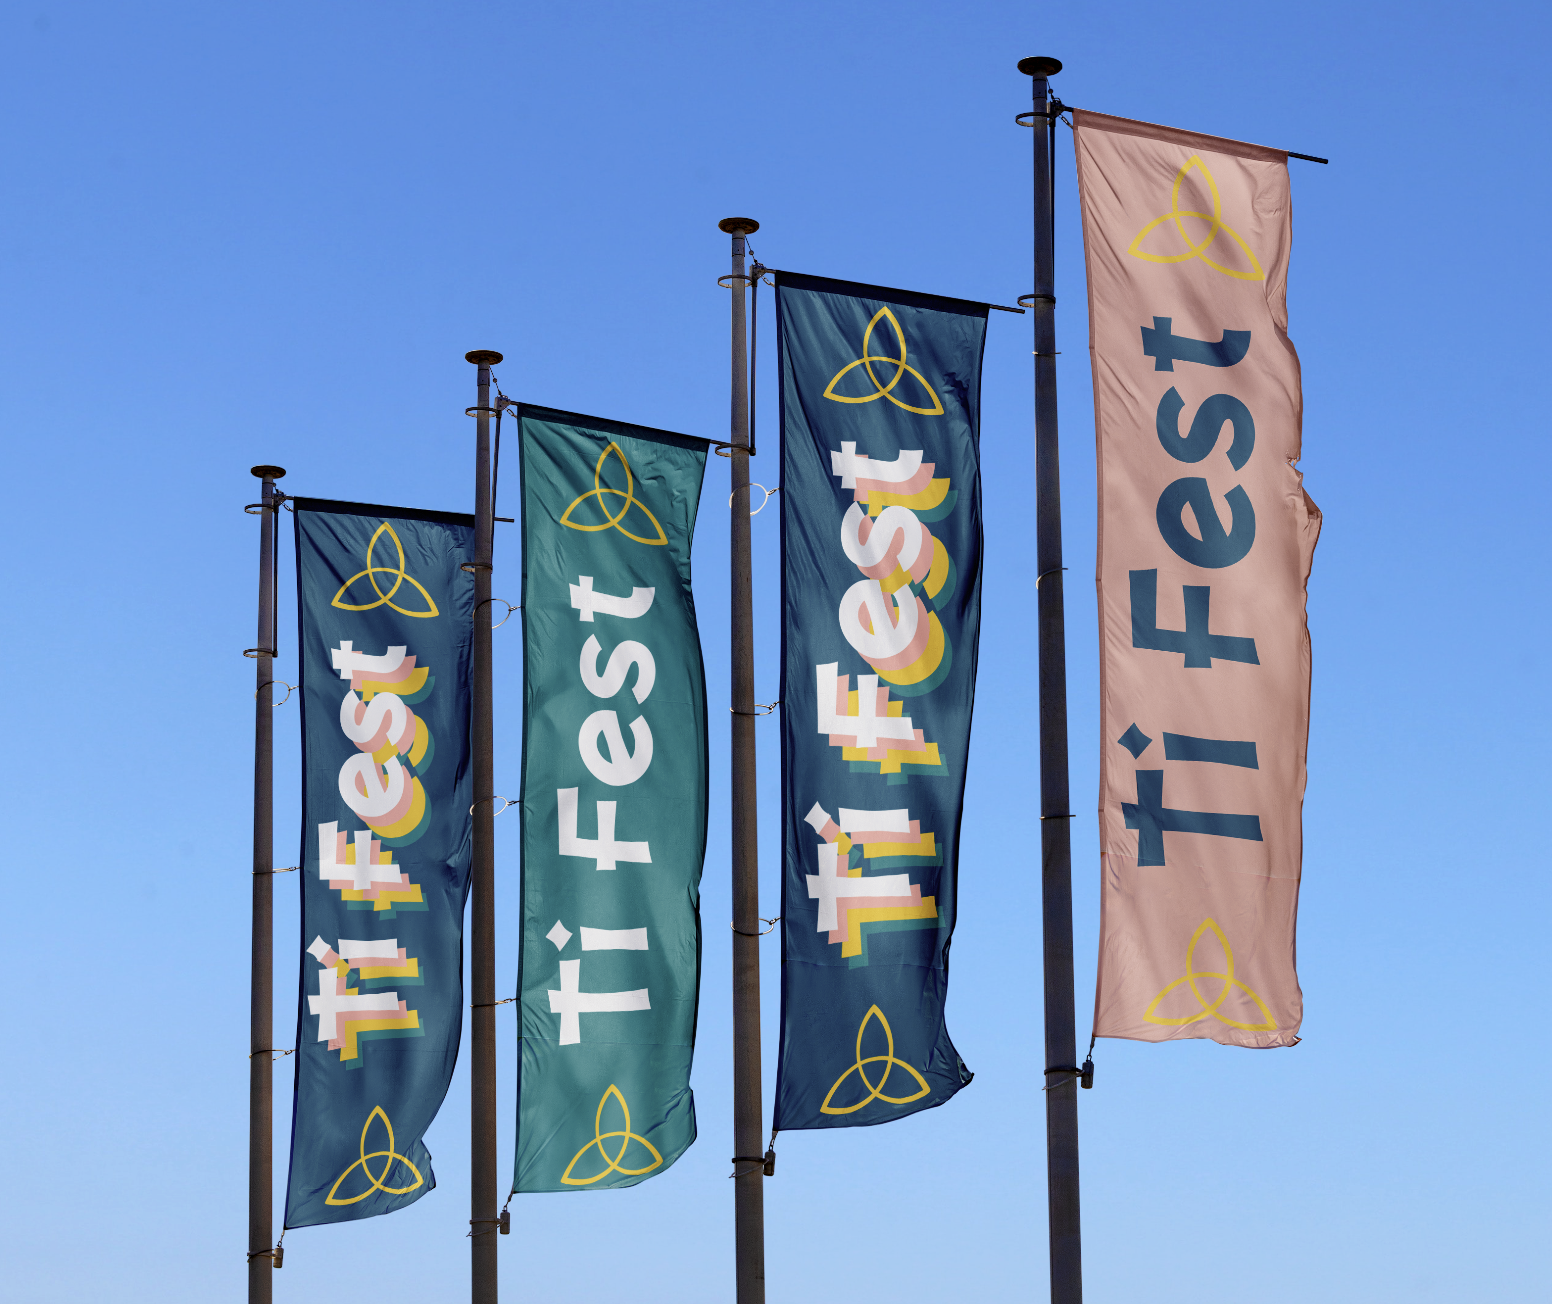 festival branding for a Welsh music festival called "Ti Fest", "ti" being Welsh for "you". Aims to encourage the use of Welsh language through celebrating independent Welsh music.